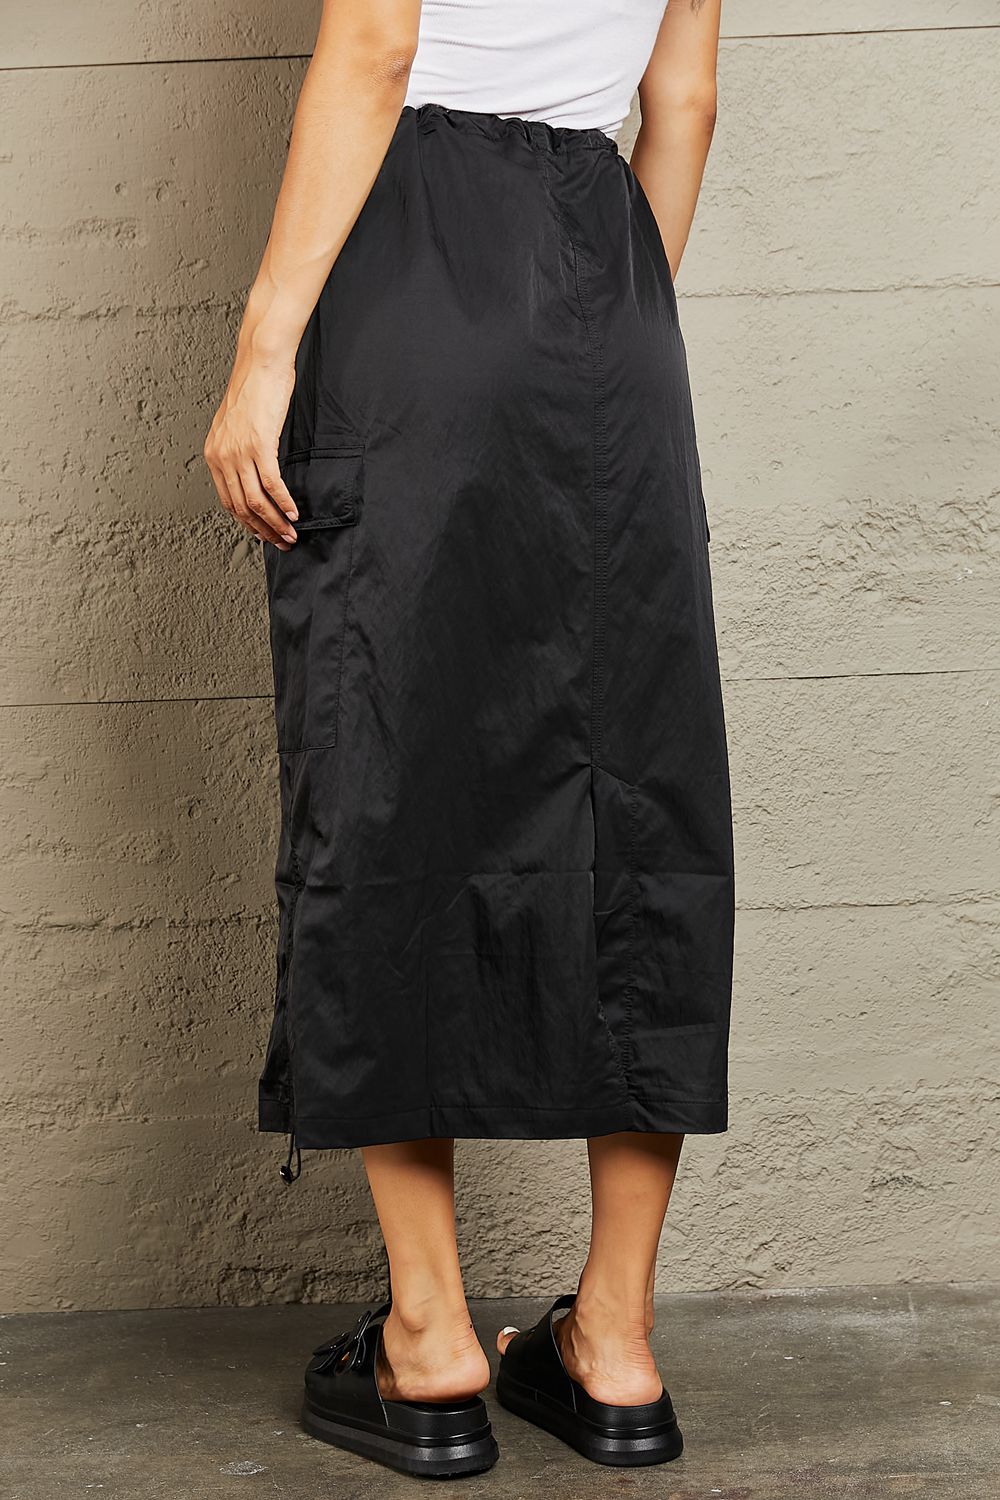 HYFVE Just In Time High Waisted Cargo Midi Skirt in Black - Lola Cerina Boutique